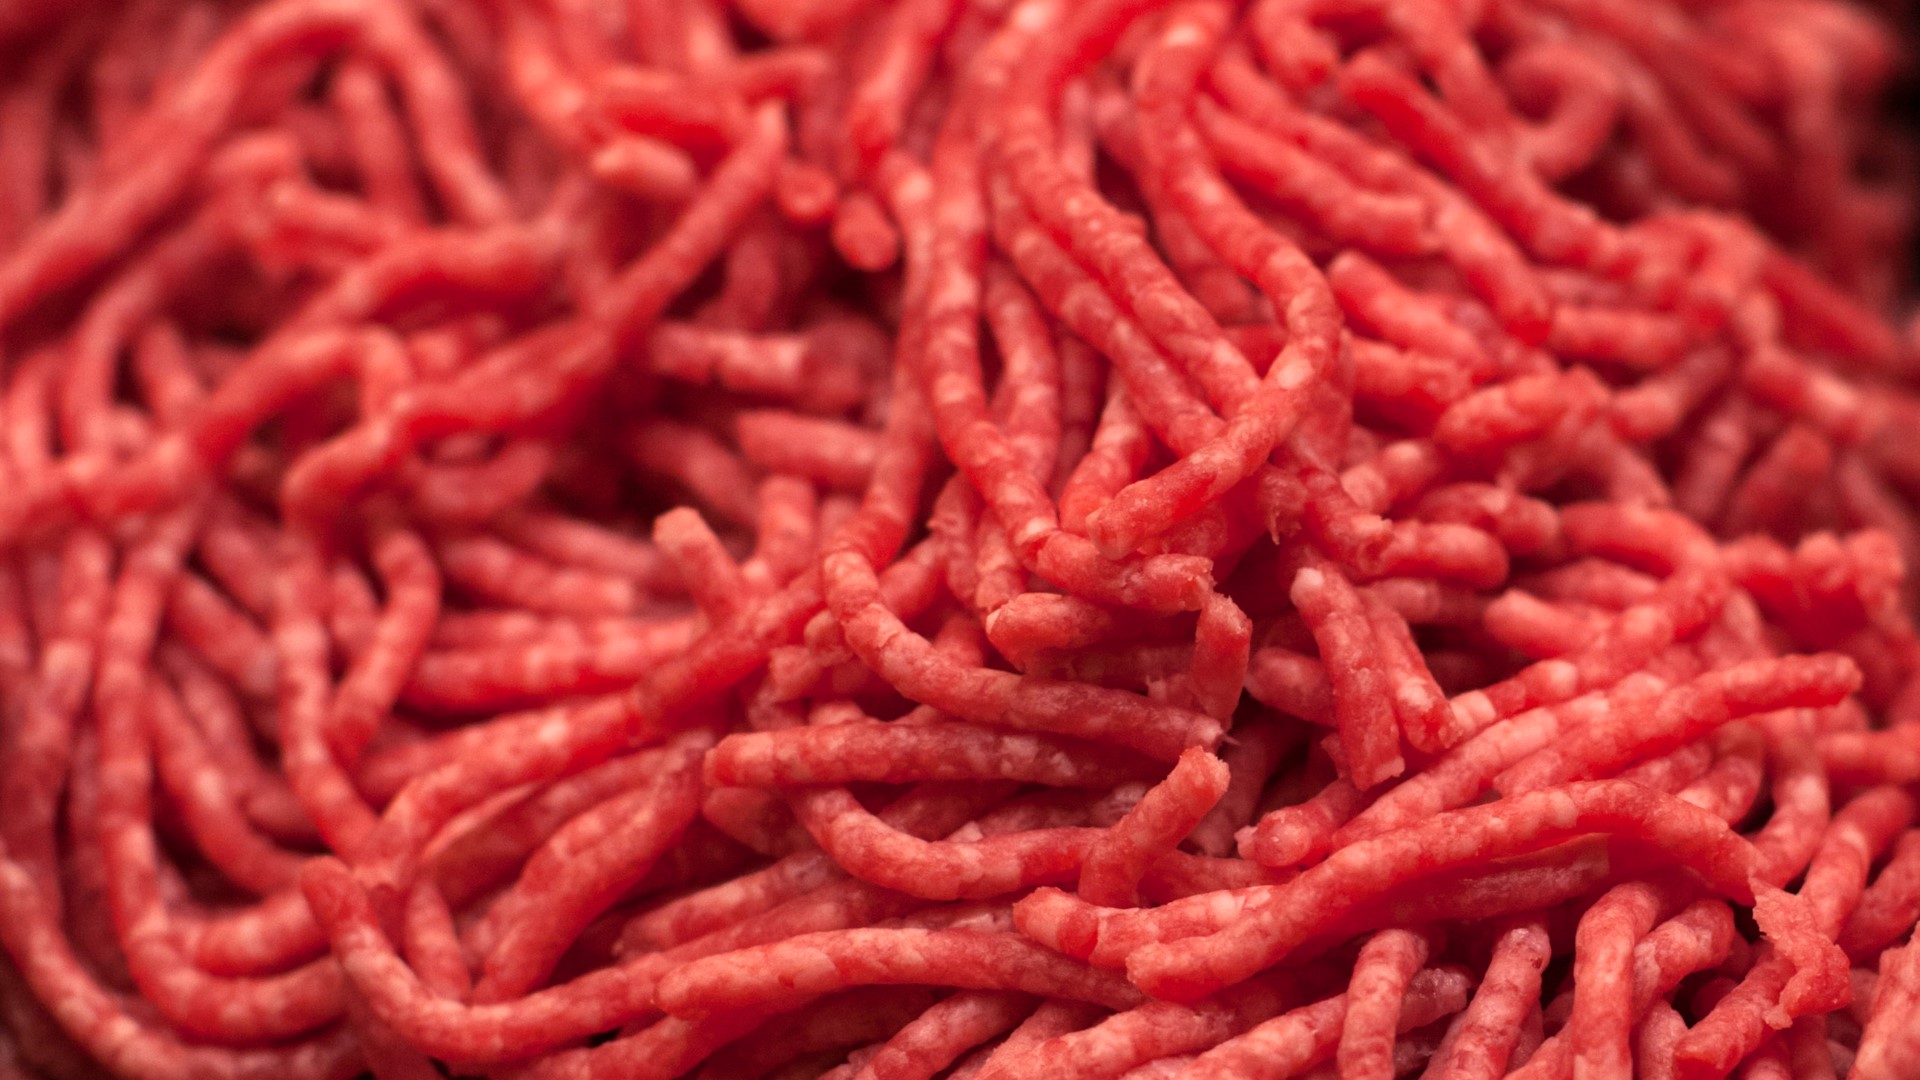 The ground beef may have been exposed to another product before getting packaged up for sale, raising the fears of E. coli contamination.